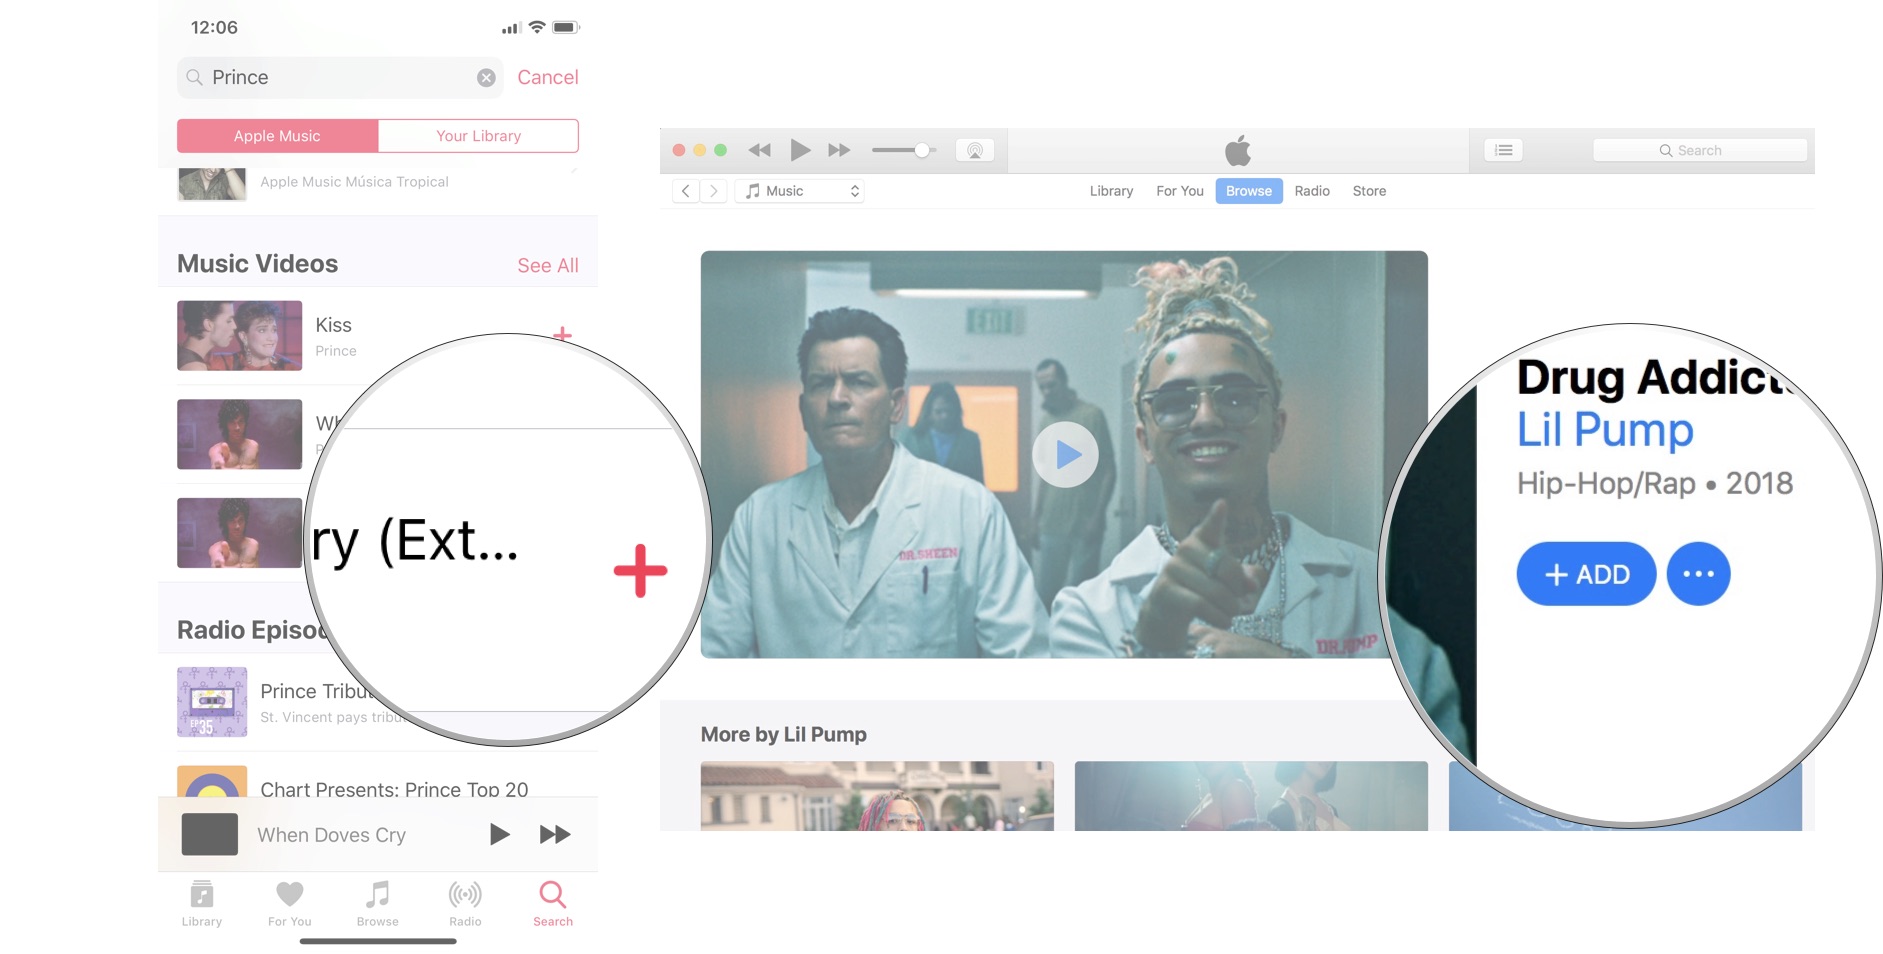 Add music videos in Apple Music: Select the Add To button